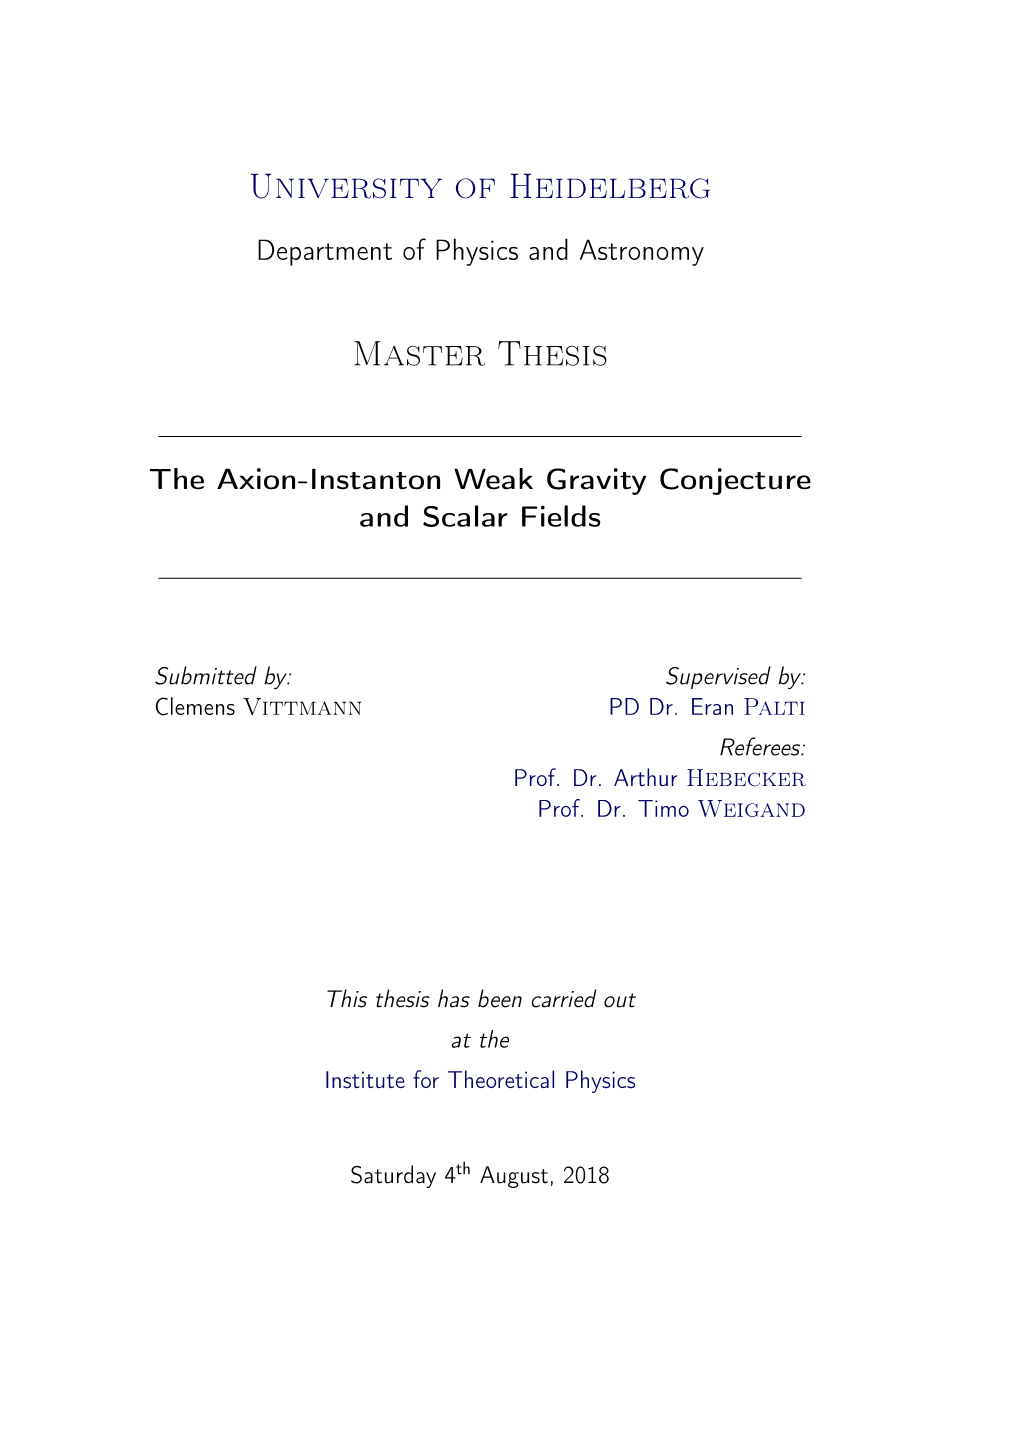 The Axion-Instanton Weak Gravity Conjecture and Scalar Fields